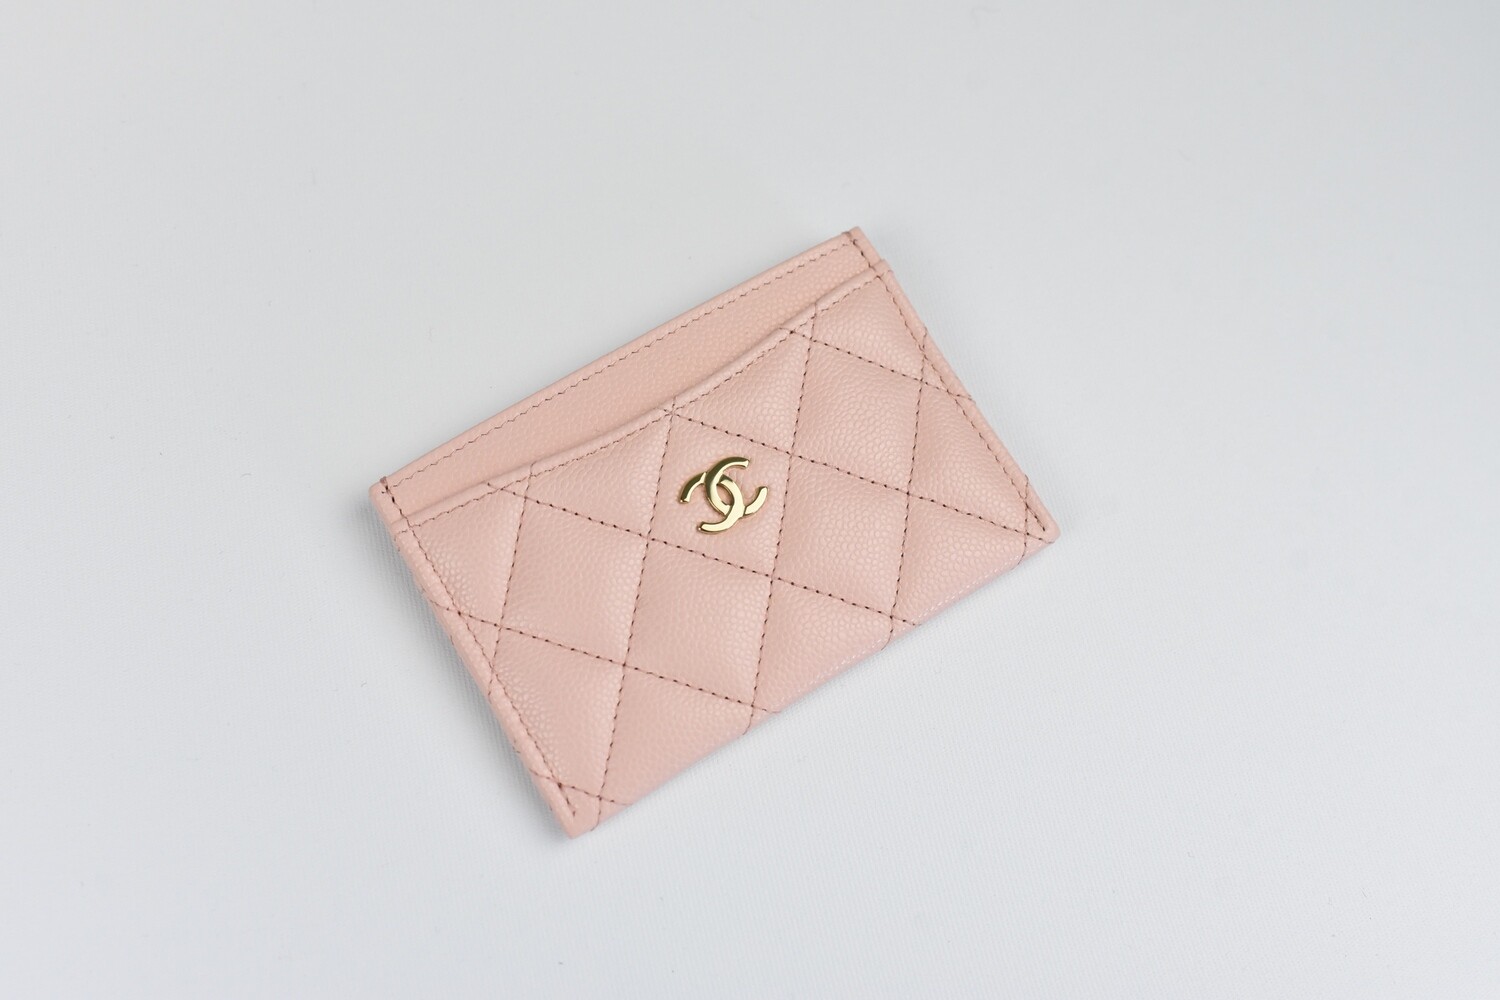 Chanel SLG Flat Cardholder, Pink Caviar with Gold Hardware, New in